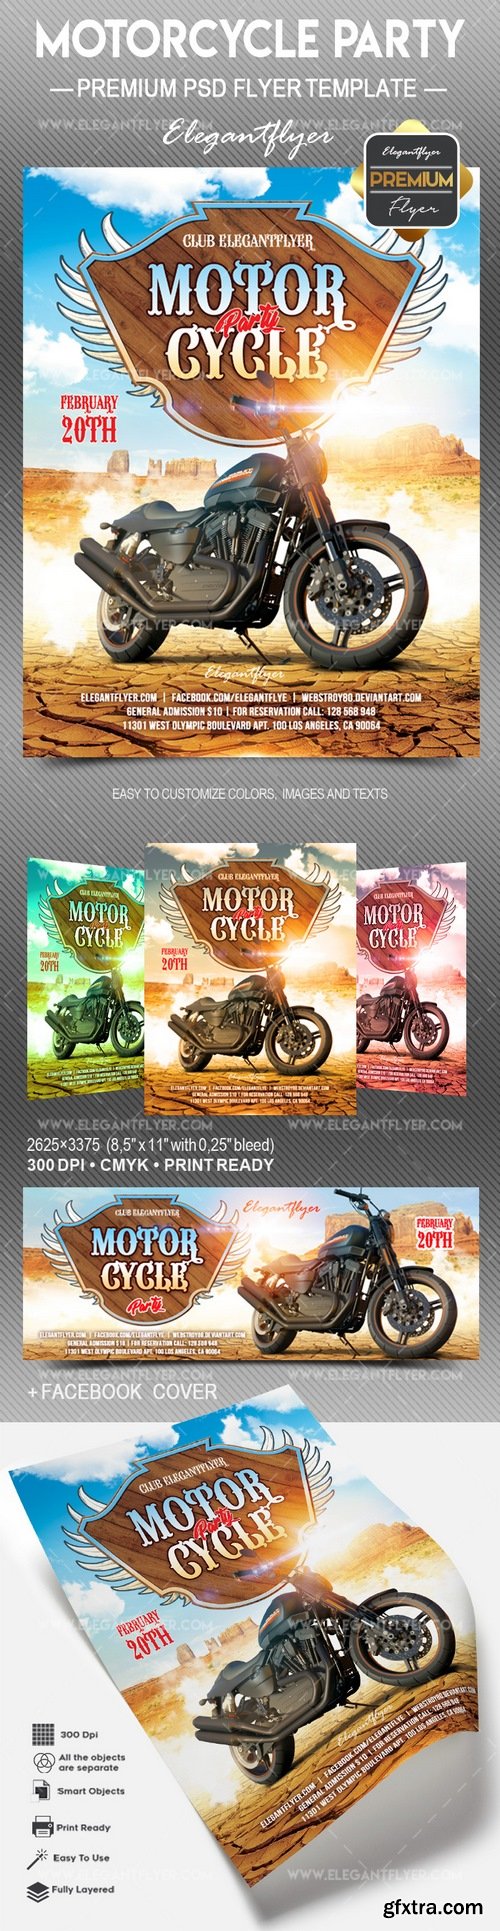 Motorcycle party v02 – Flyer PSD Template + Facebook Cover